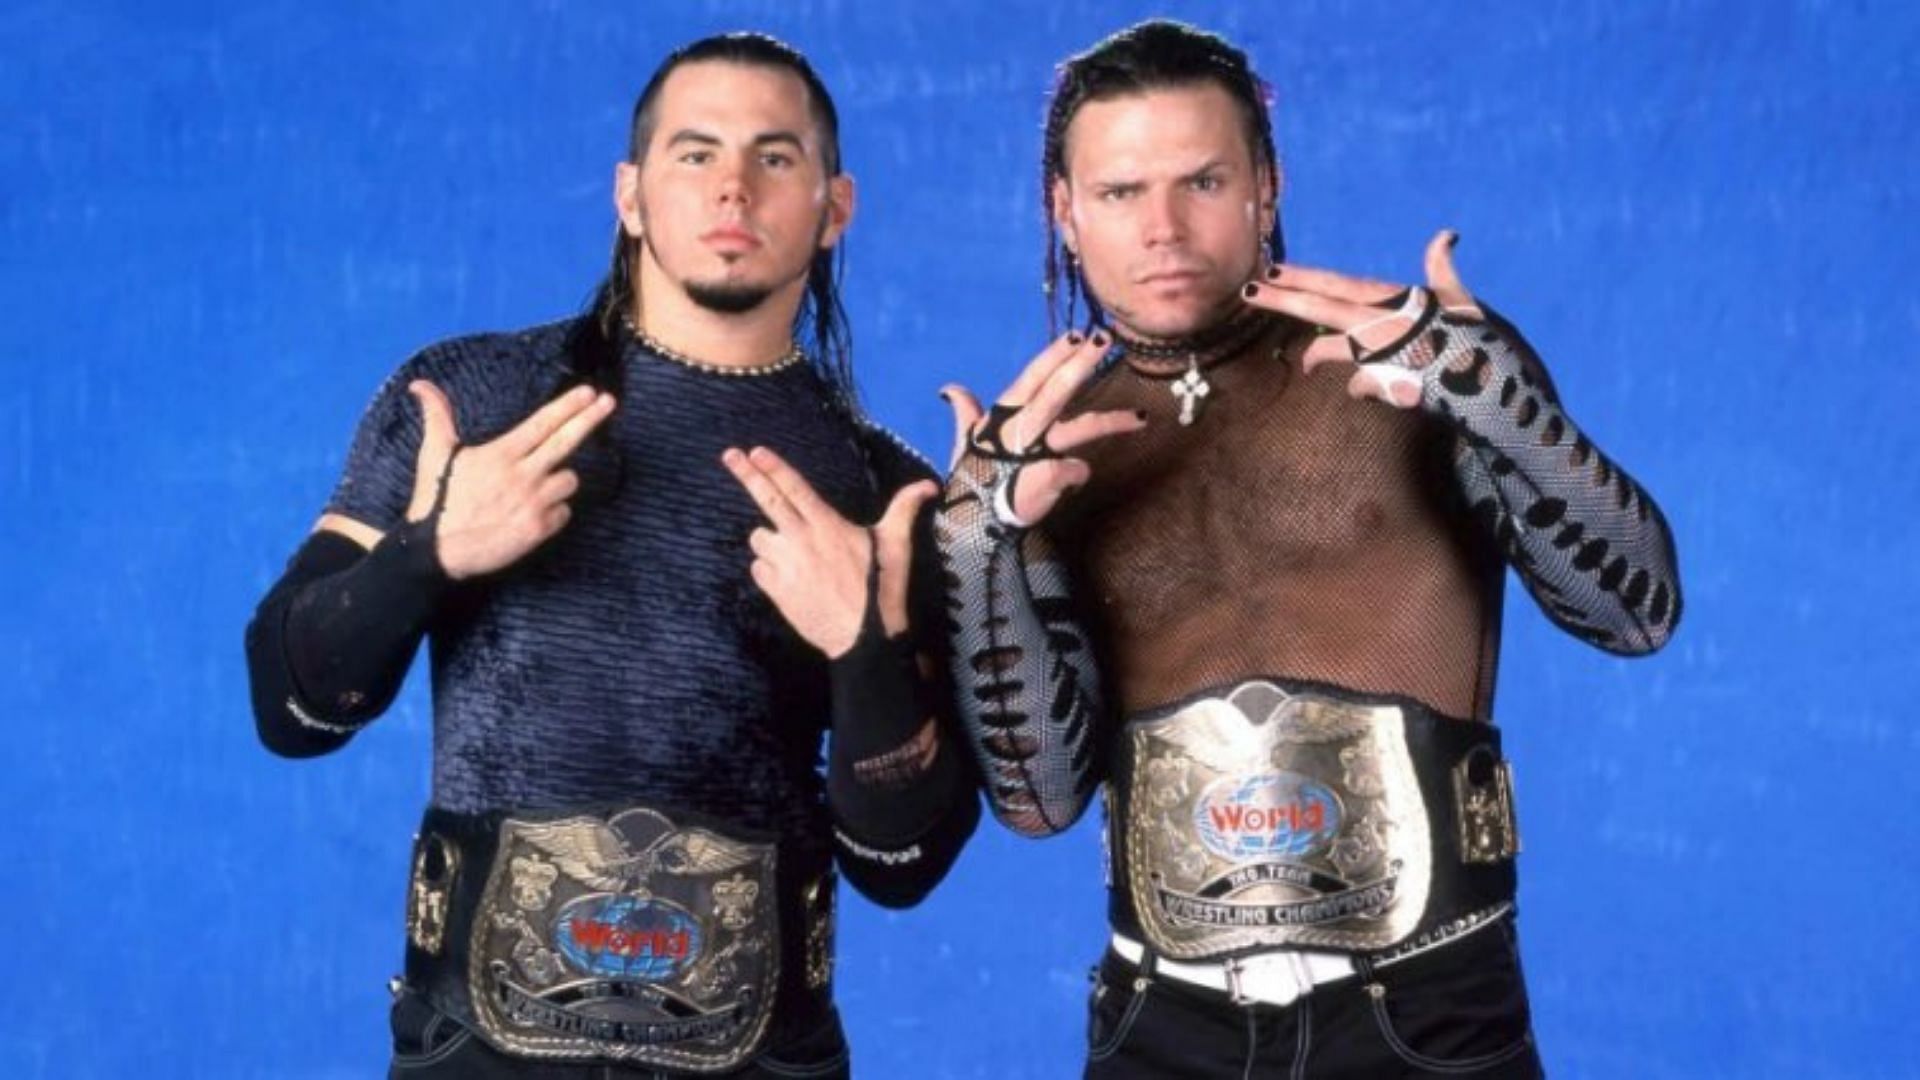 The Hardys spotted with WWE Attitude Era legend